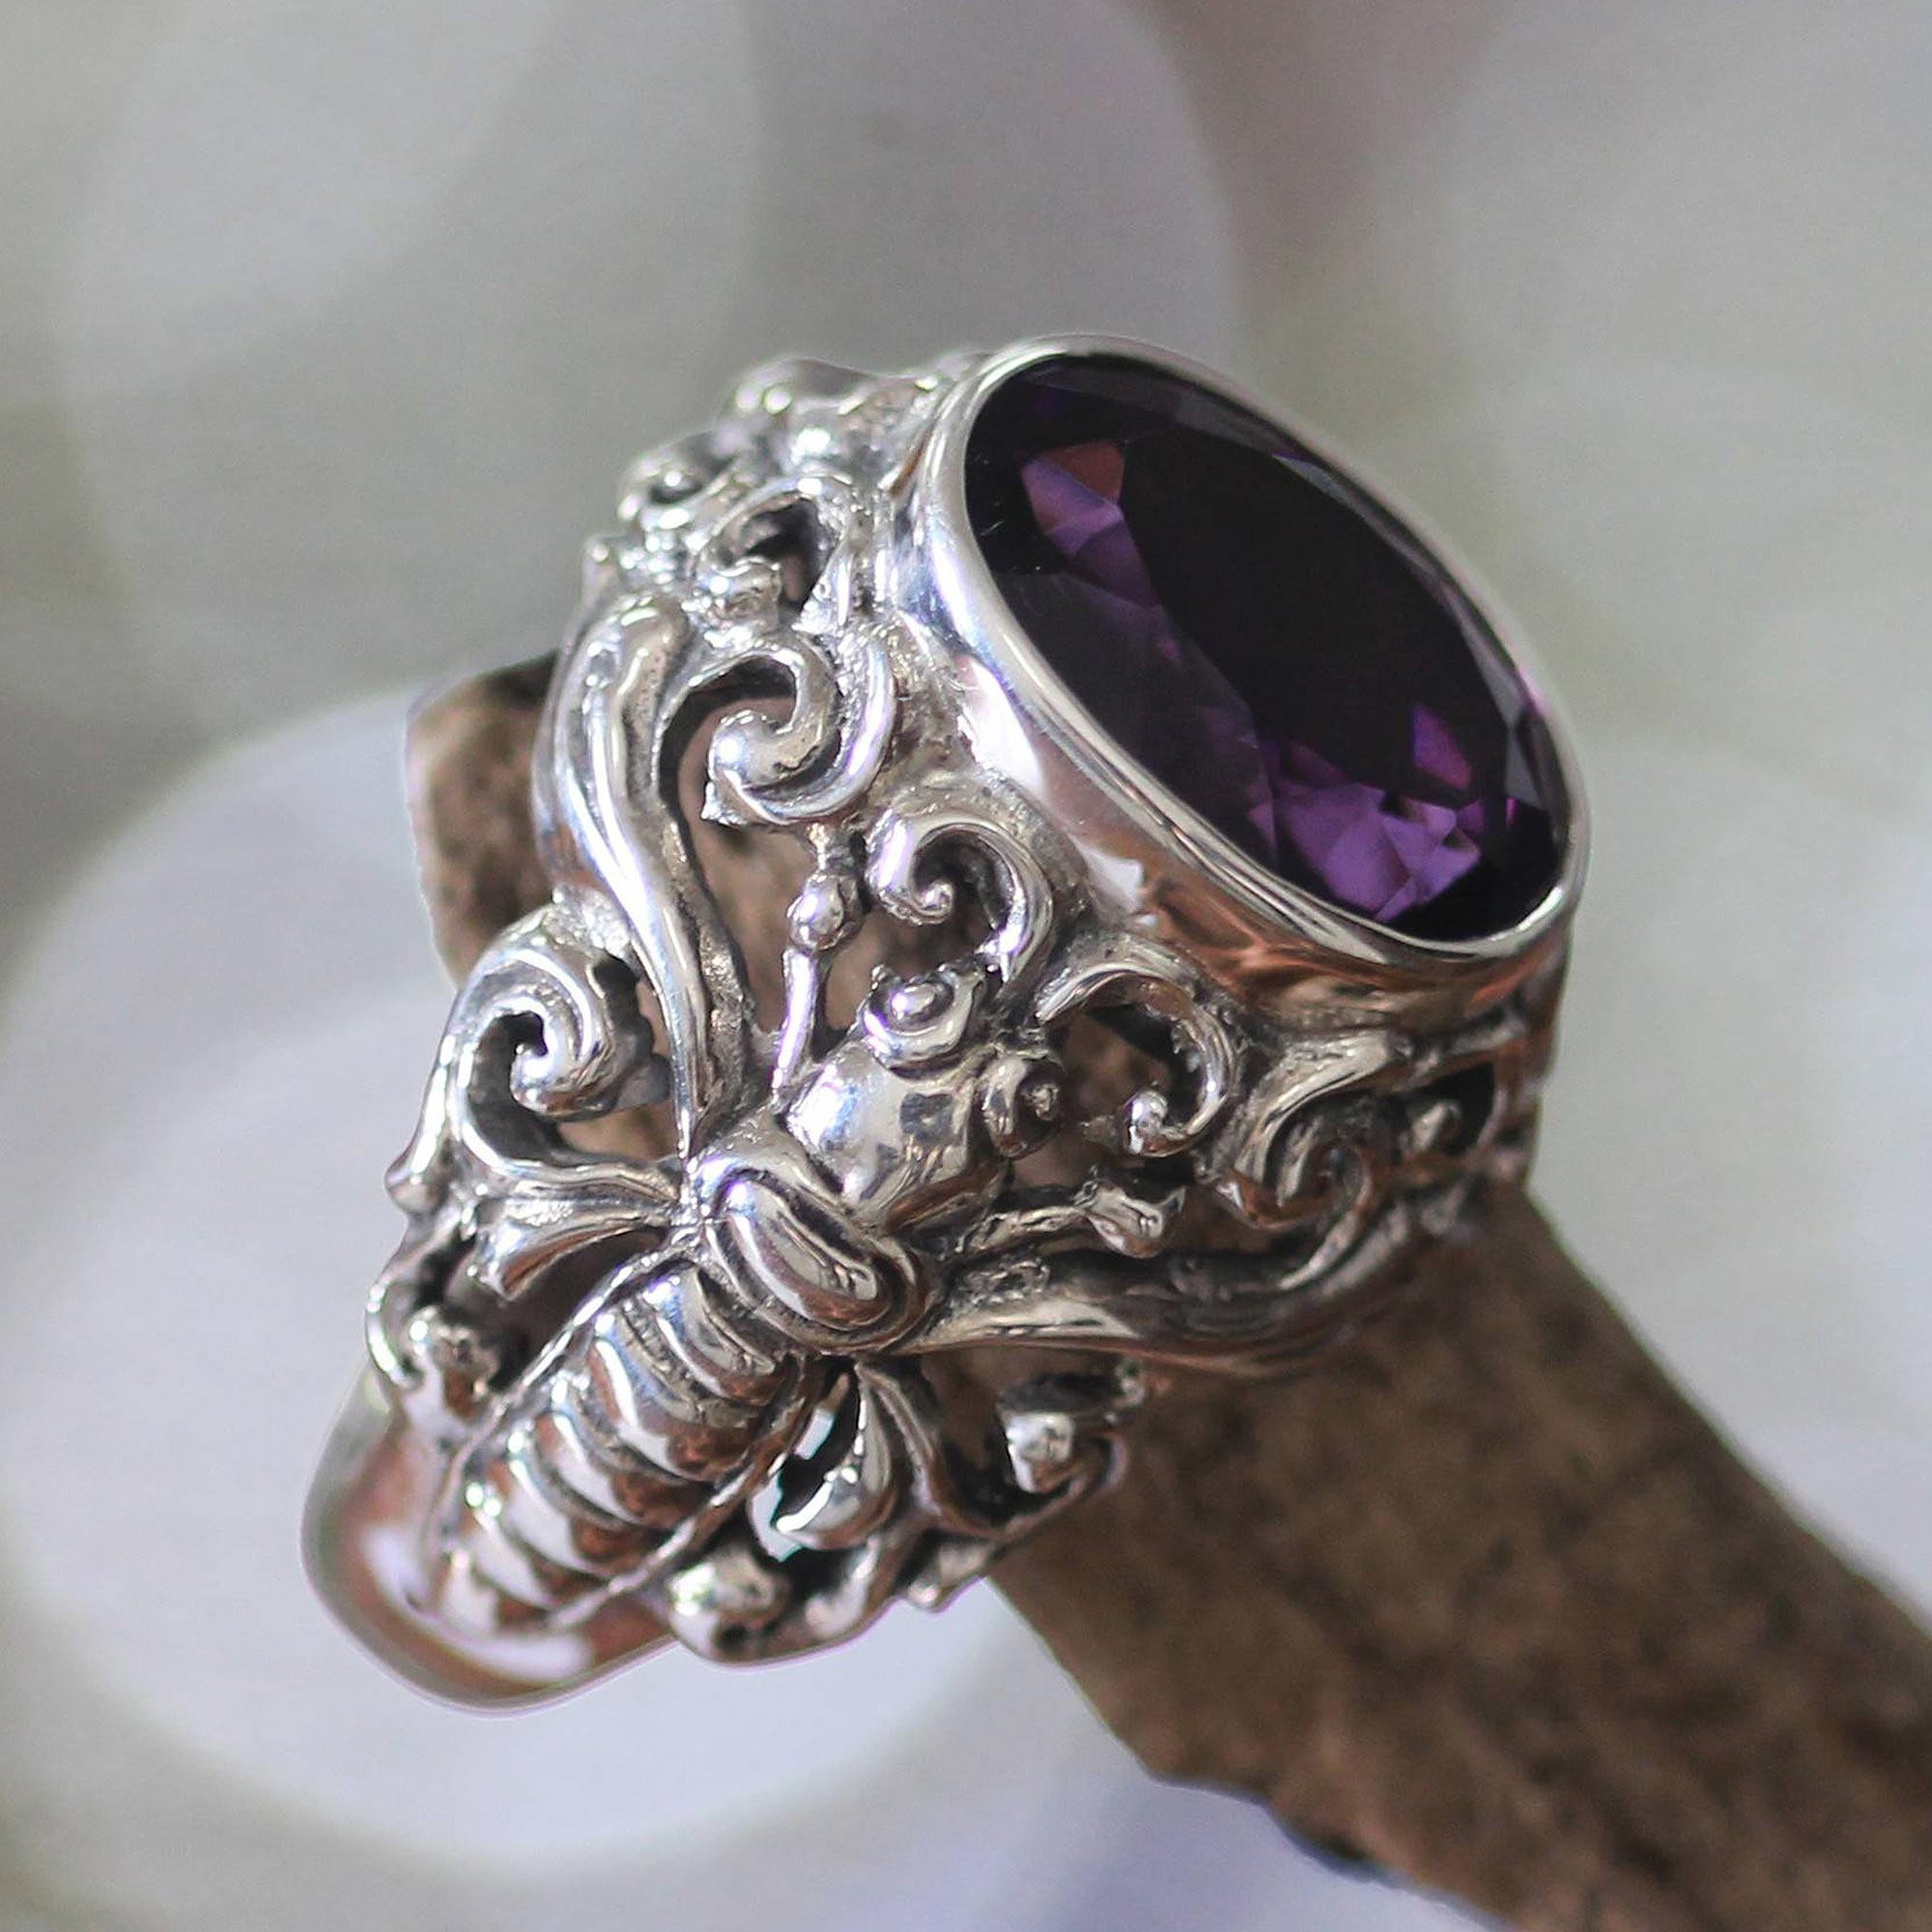 Details about   Artisan Sterling Silver 925 African Amethyst Solitaire Bali NOVICA Ring Size 7